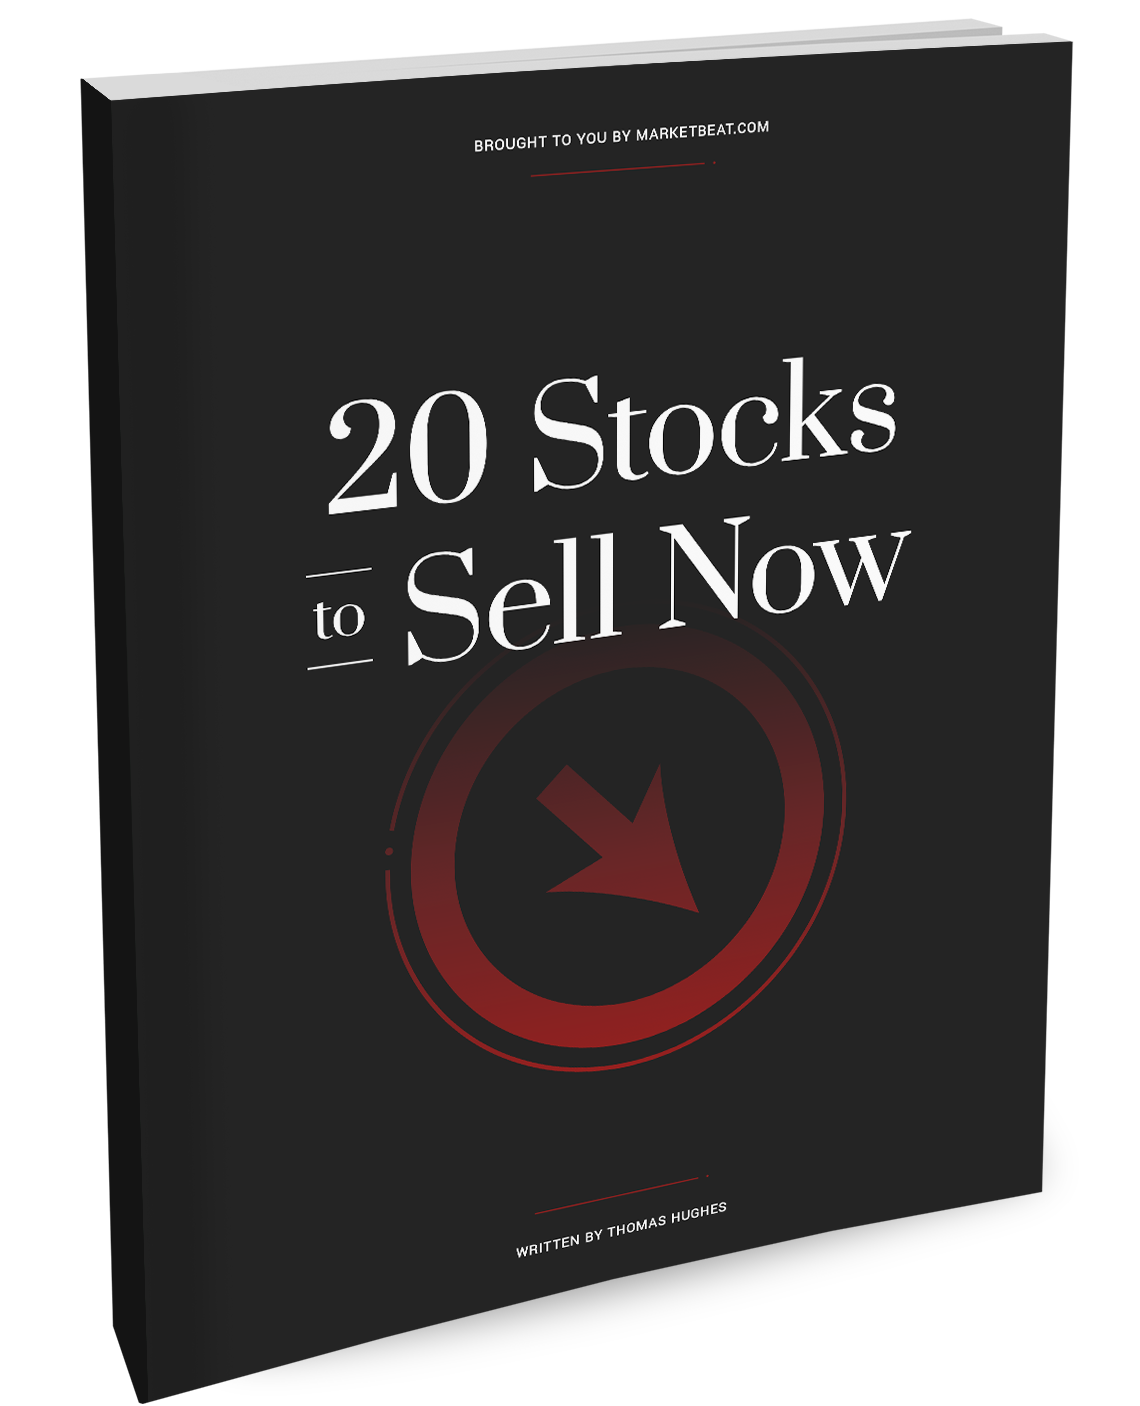 Coverage of 20 stocks for sale now